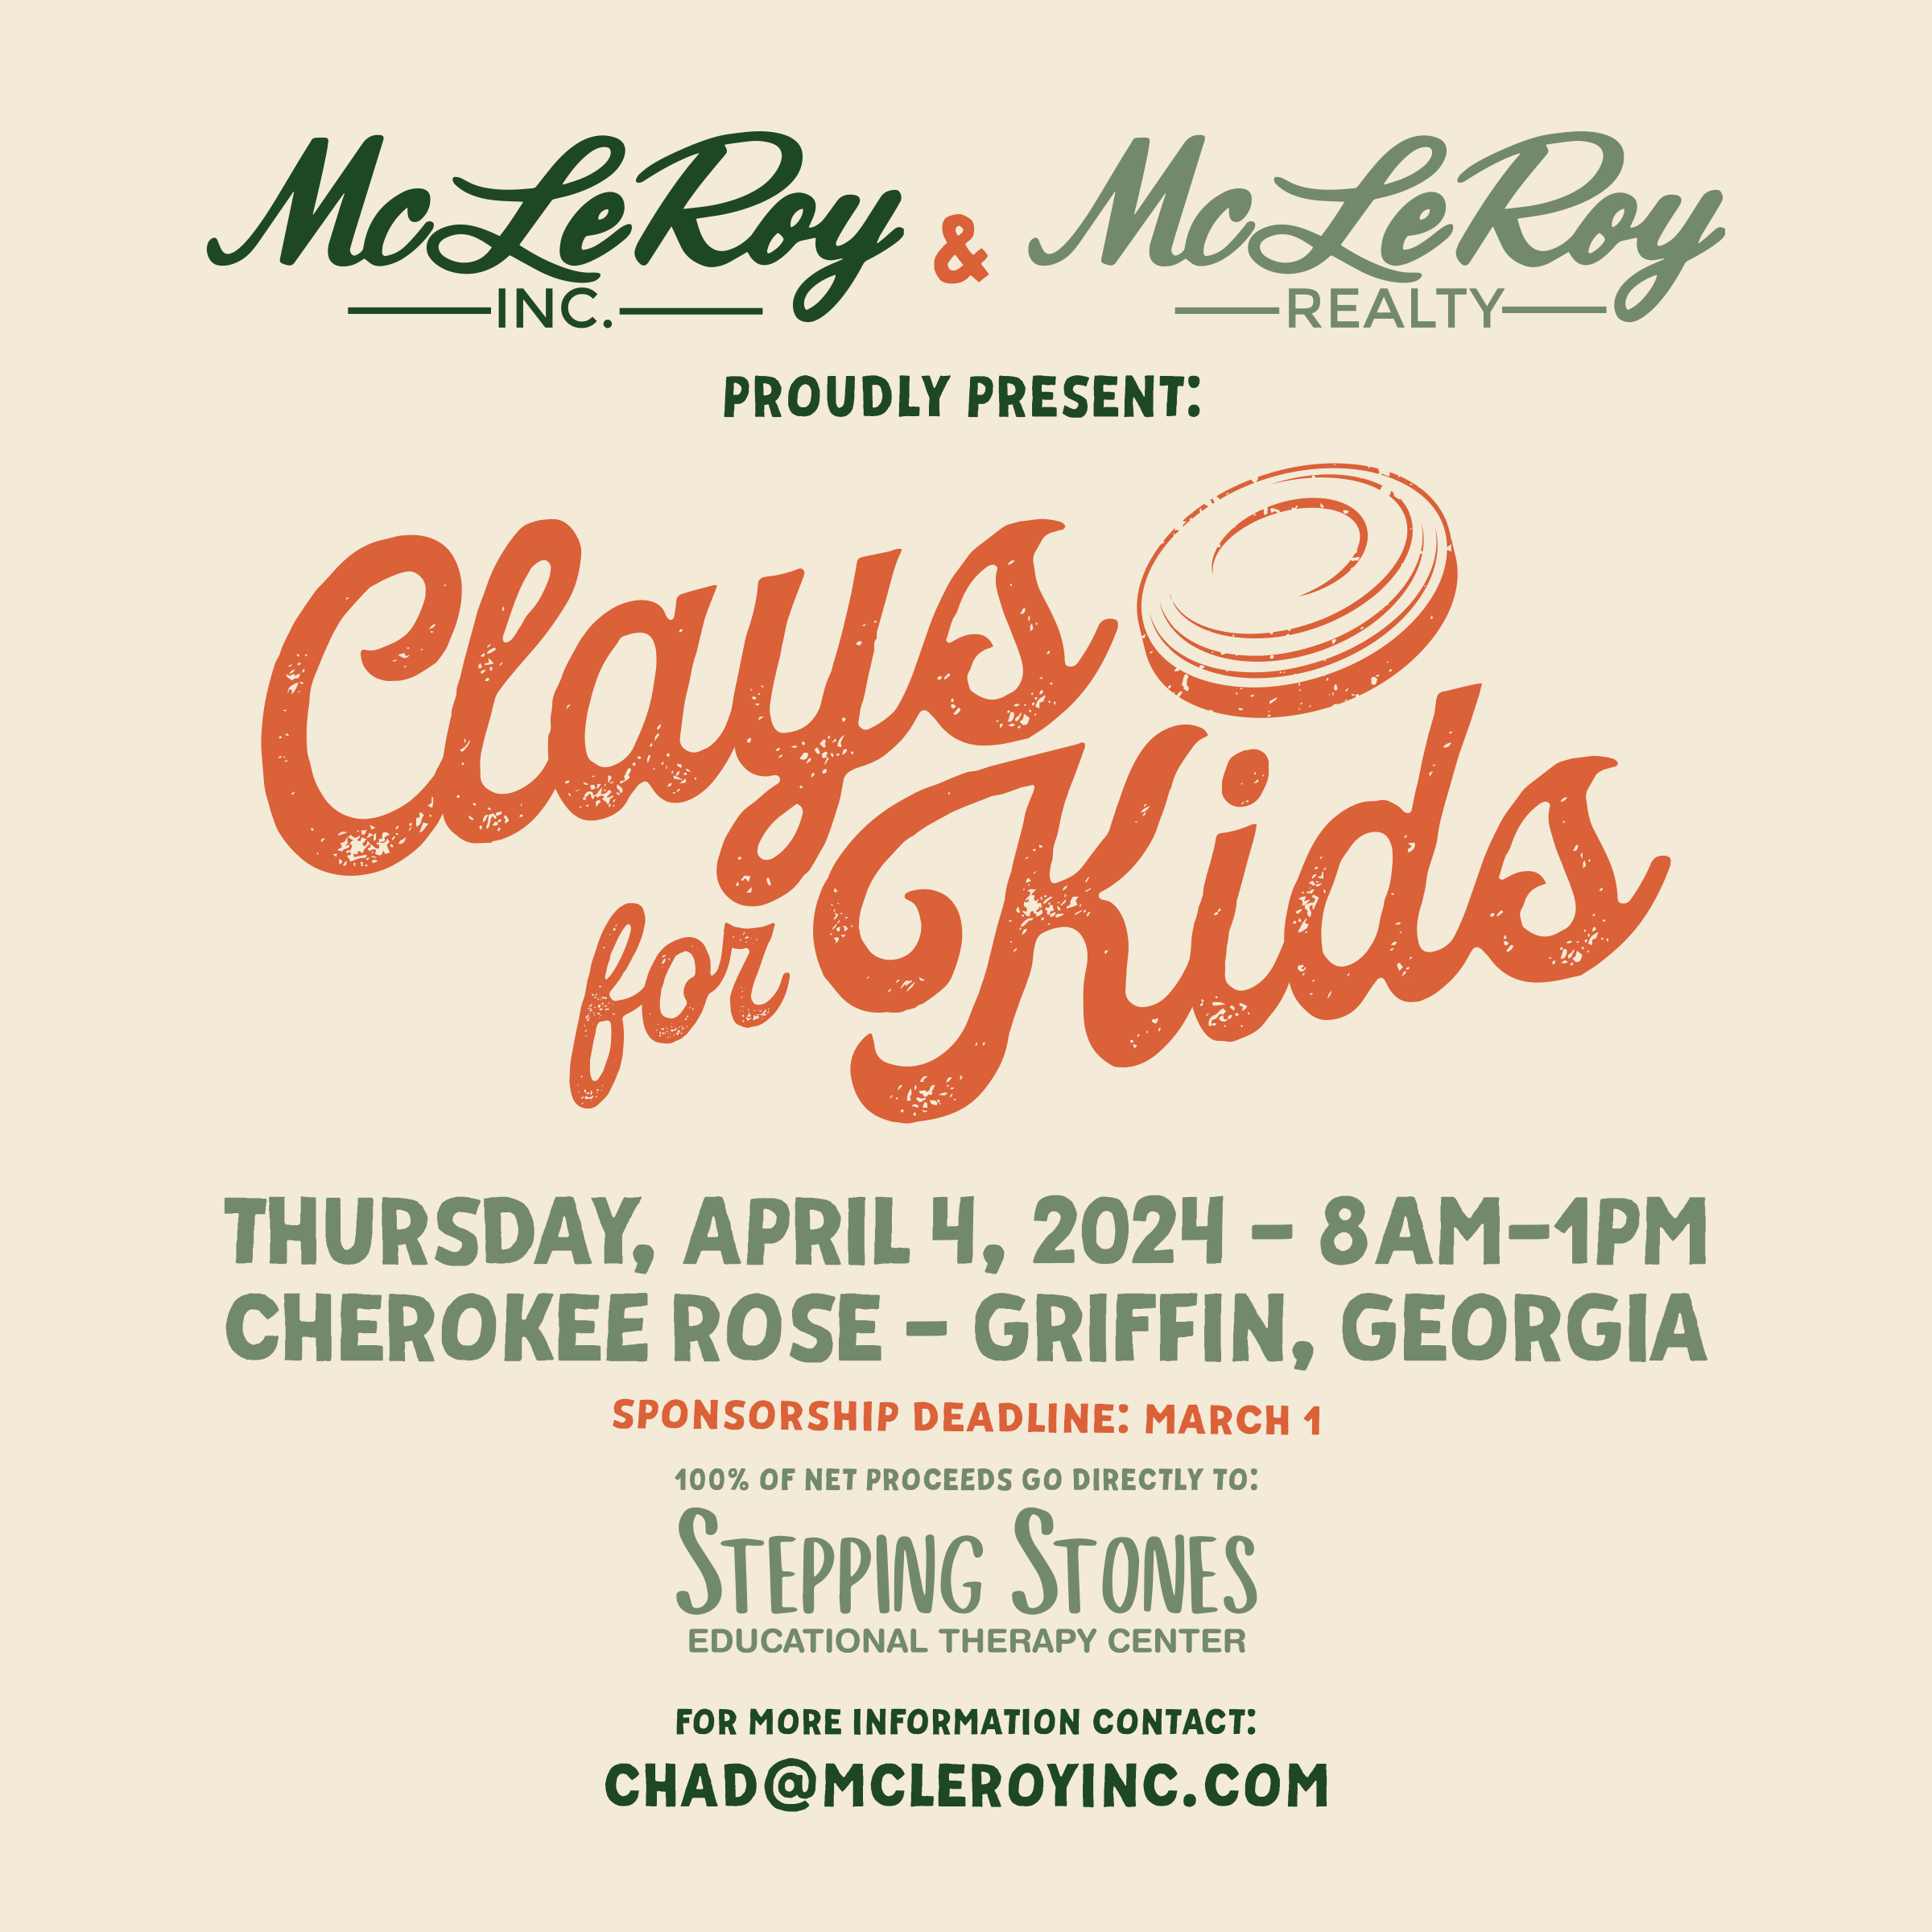 Clays for Kids